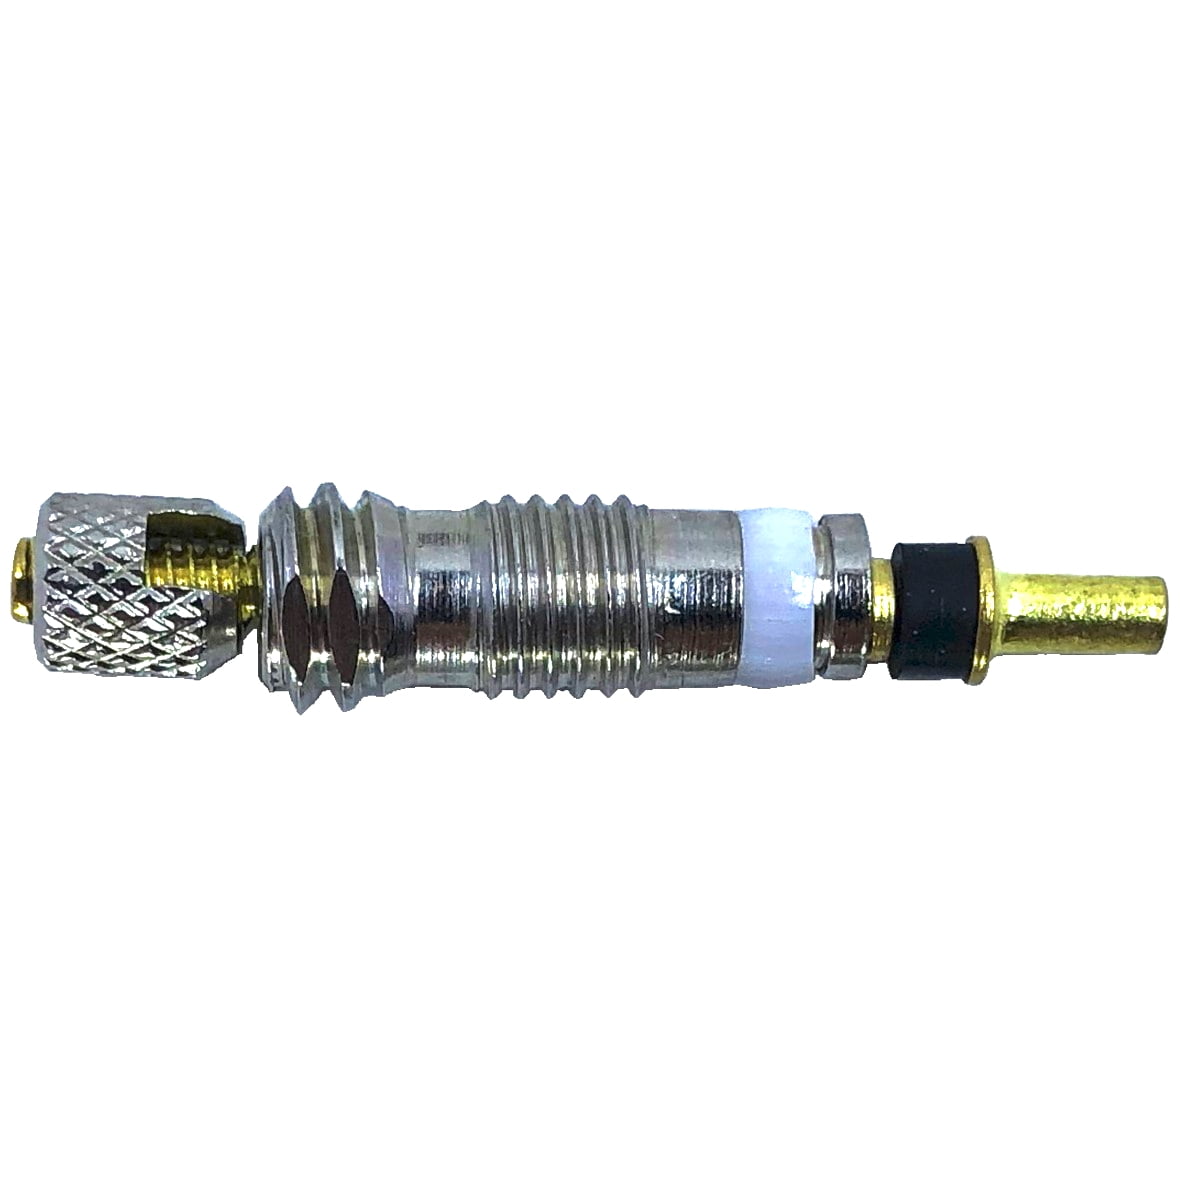 Details about   ❤Silver Detachable Presta Valve Core Replacement for Bicycle MTB/Road Bike 